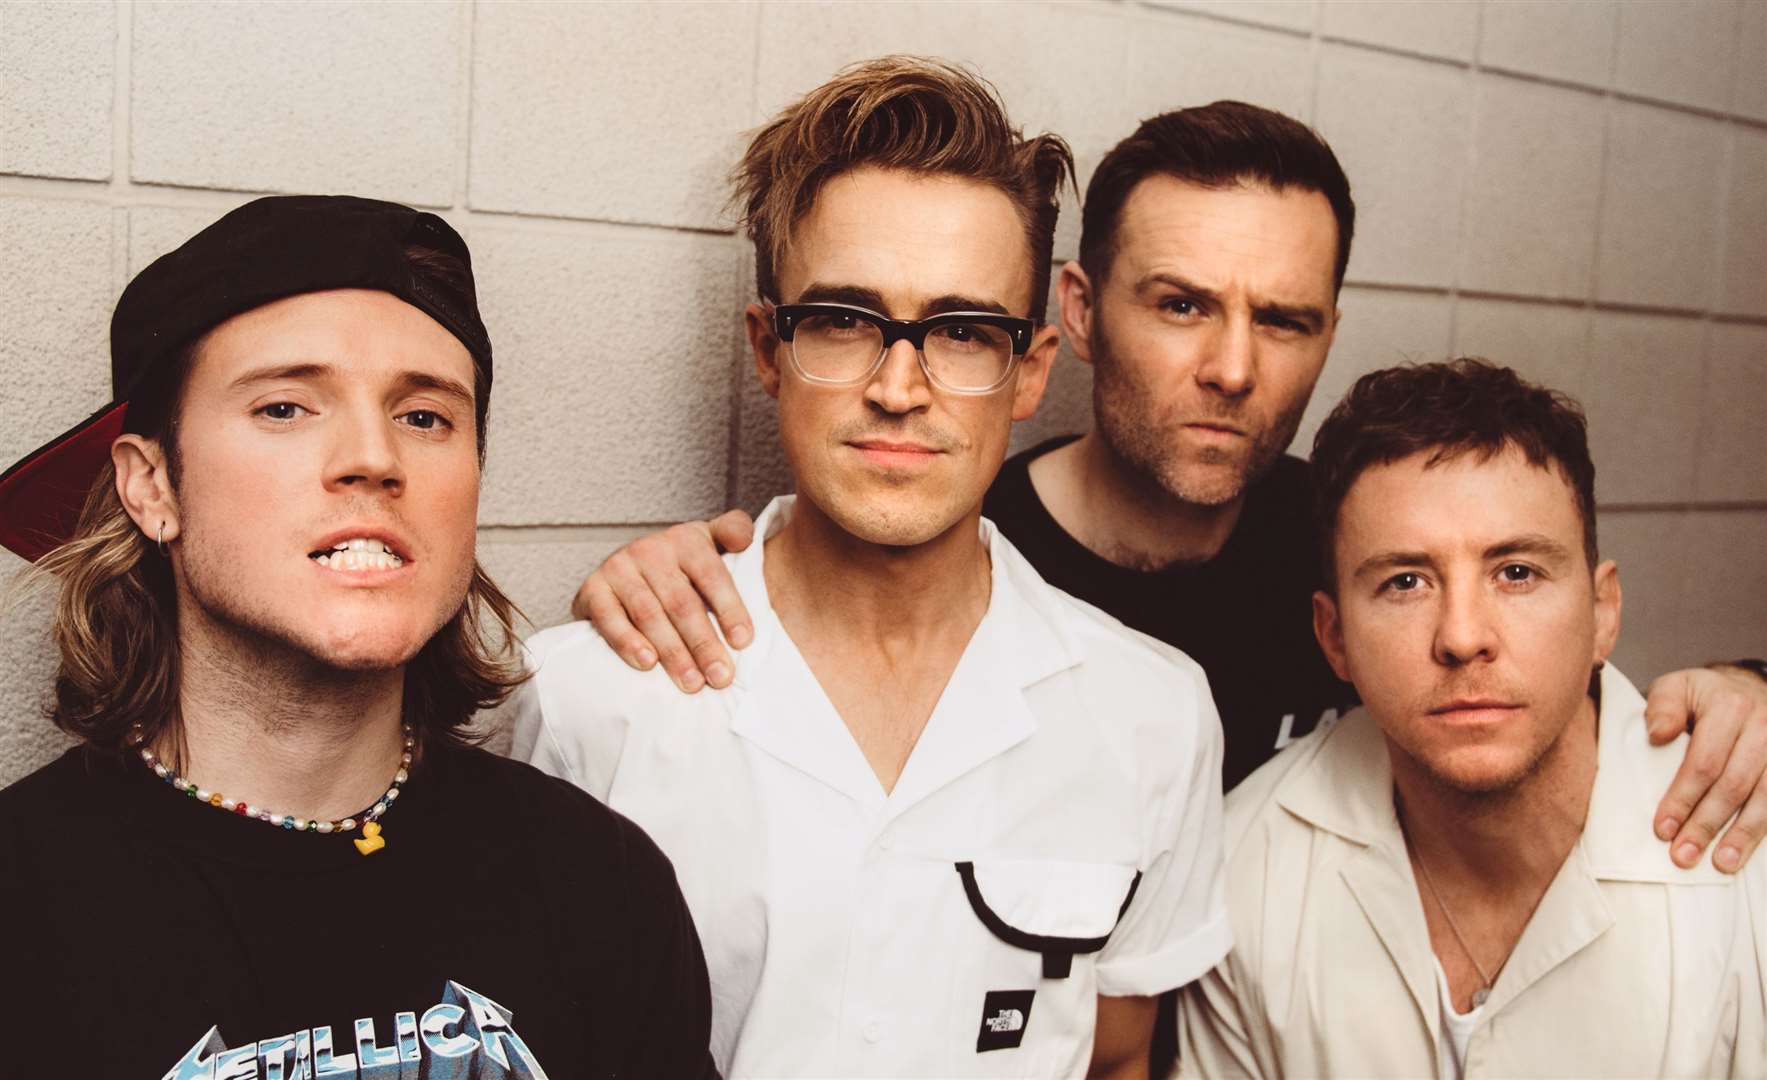 McFly are one of the headline acts at this year’s Pub in the Park